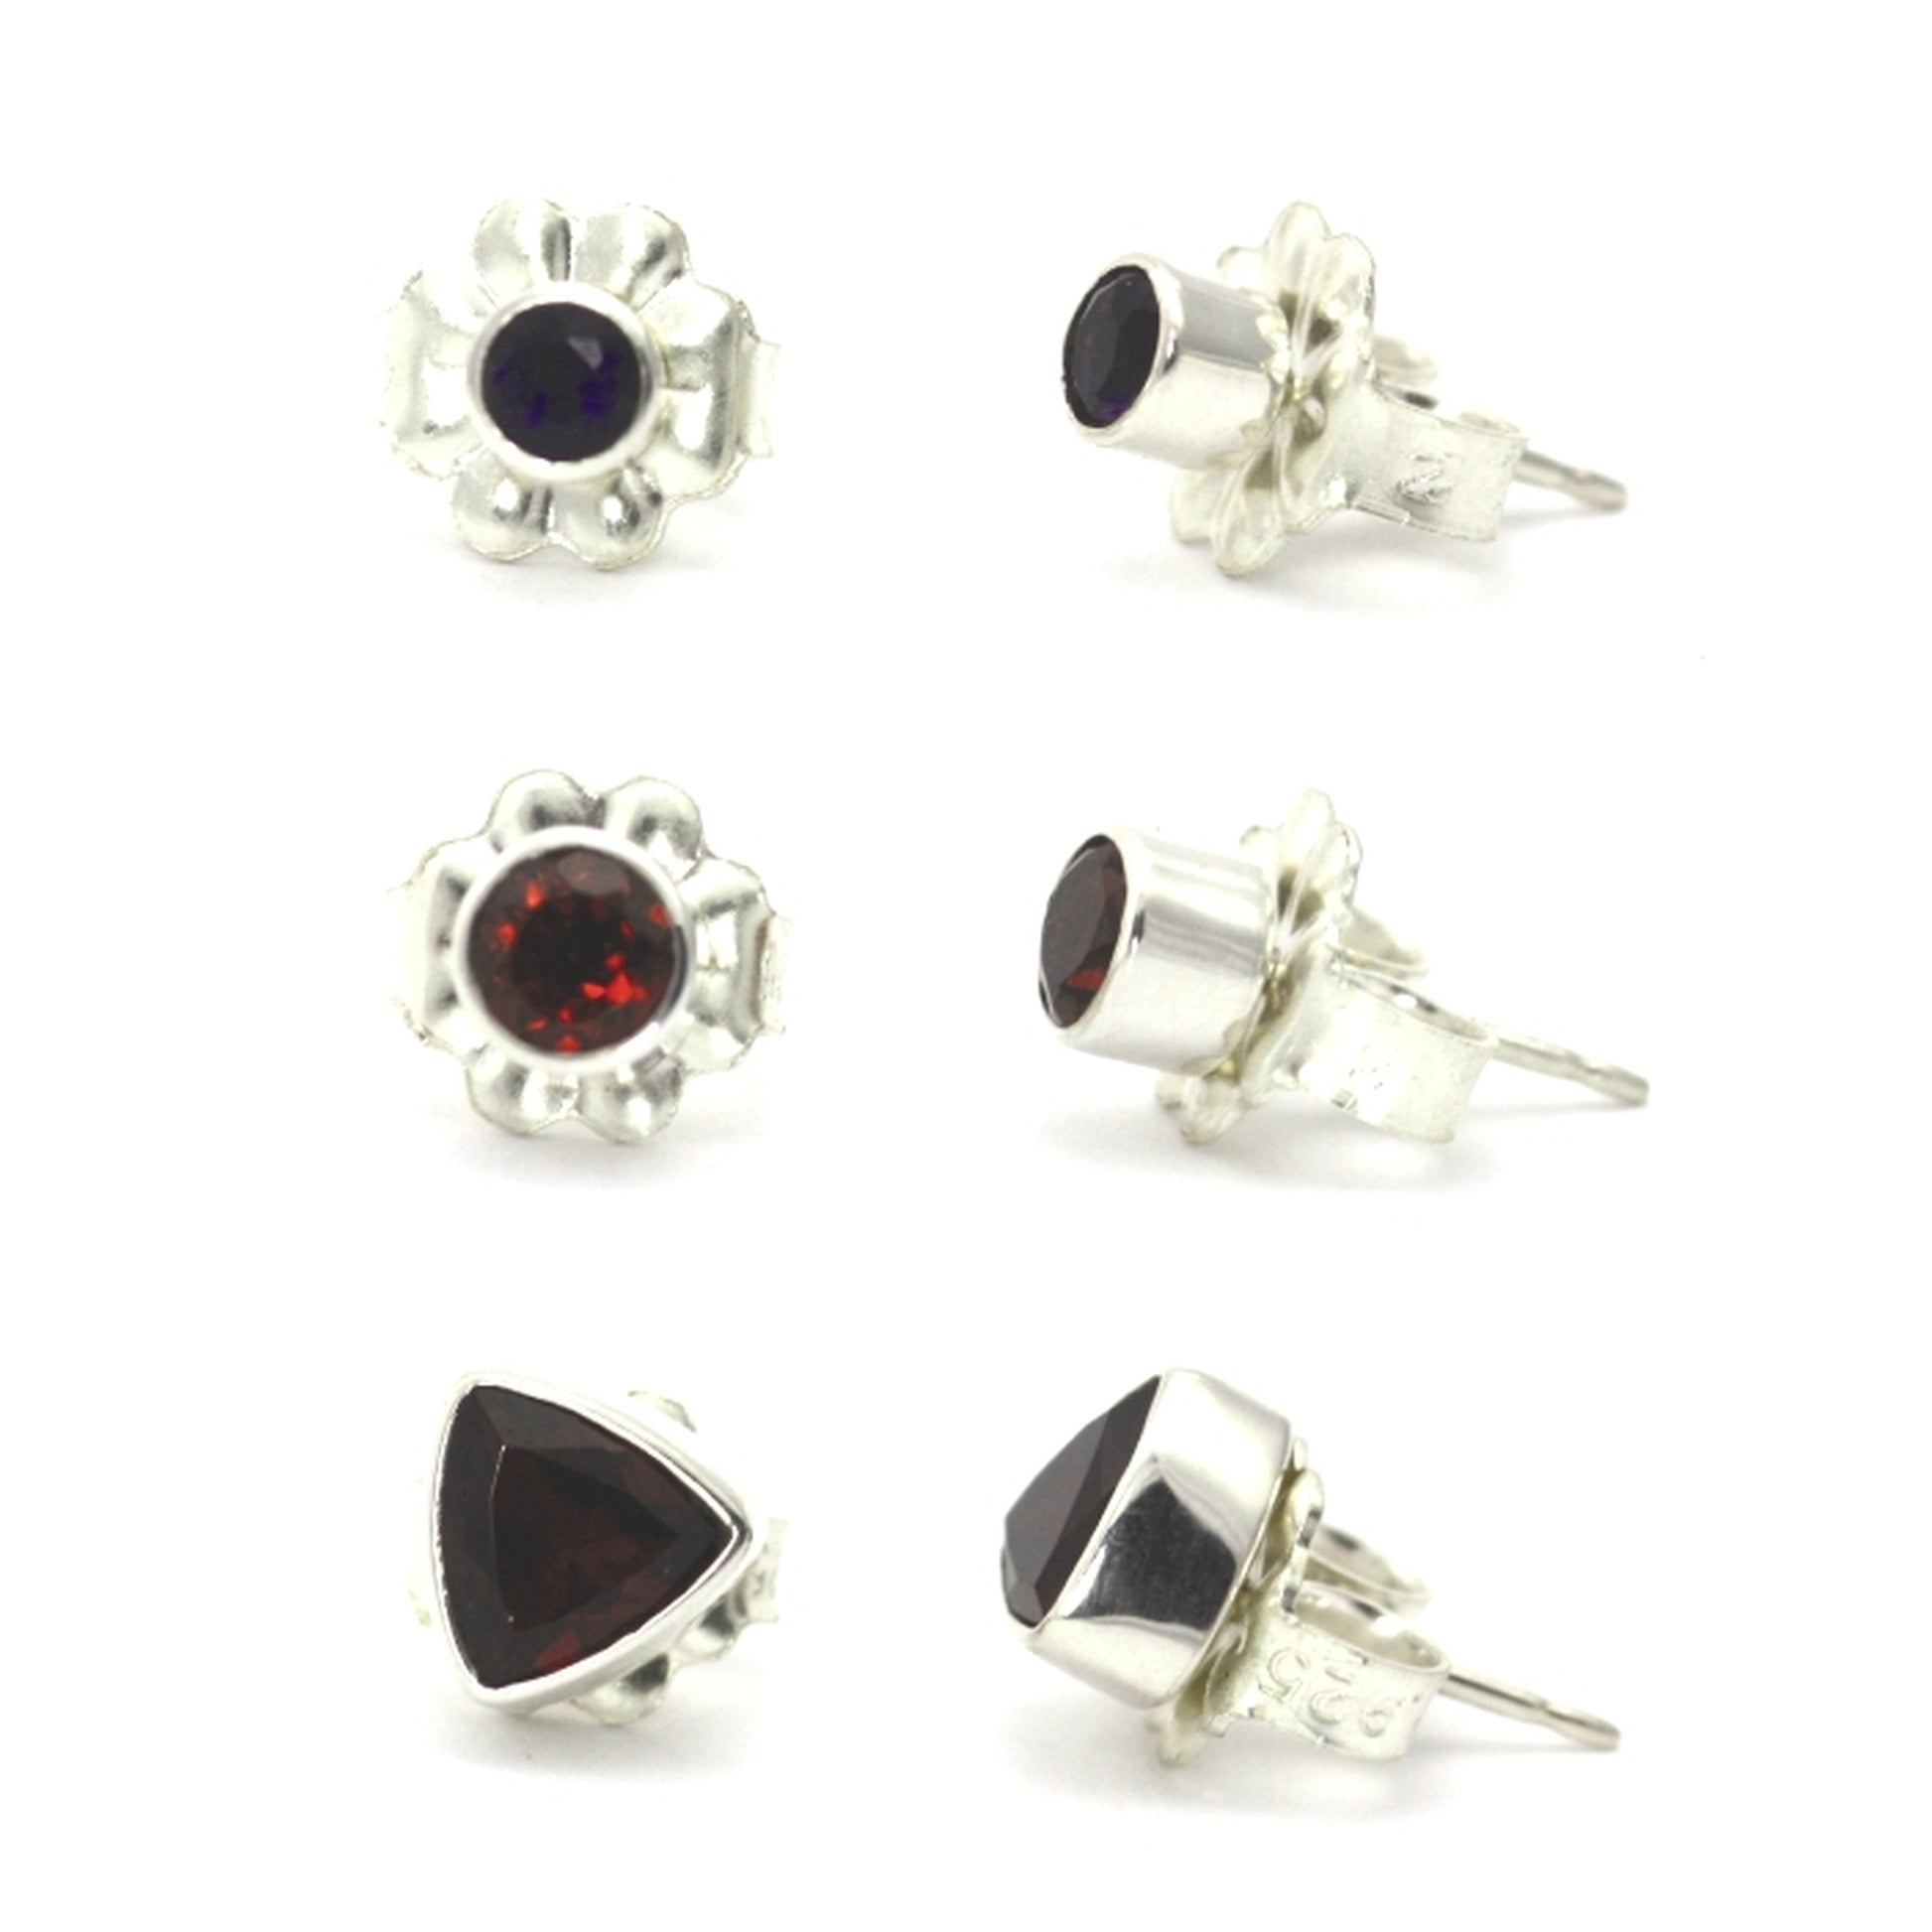 Three silver post earring sets with amethyst and garnet gemstones.